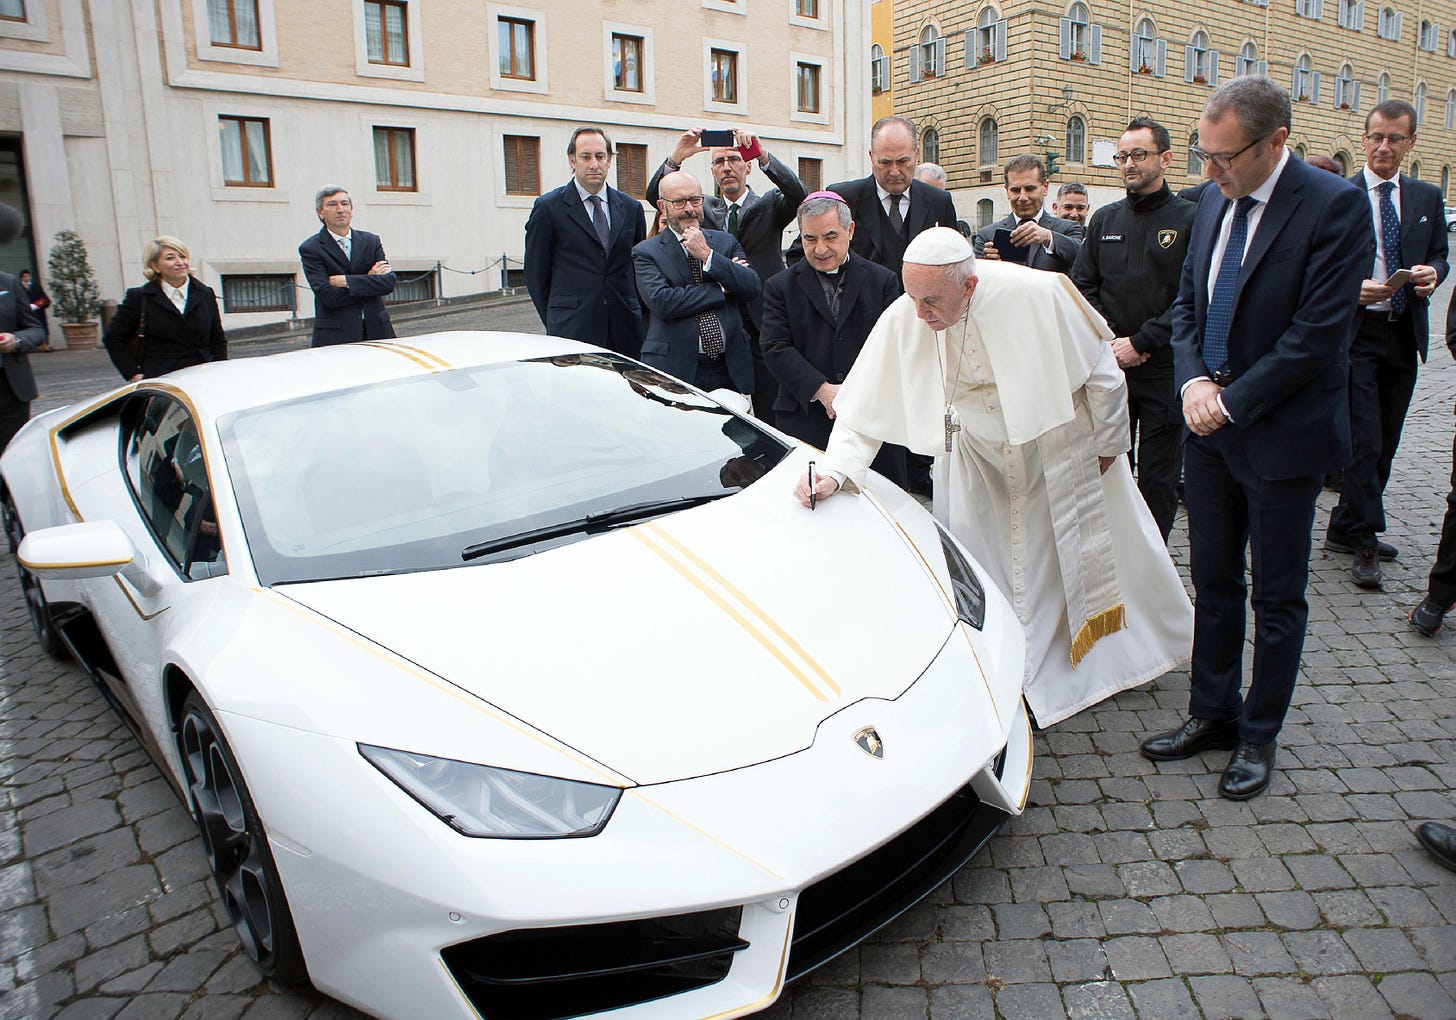 Pope Francis Is Auctioning Off His Custom Lamborghini Huracan for Charity  for $425,000